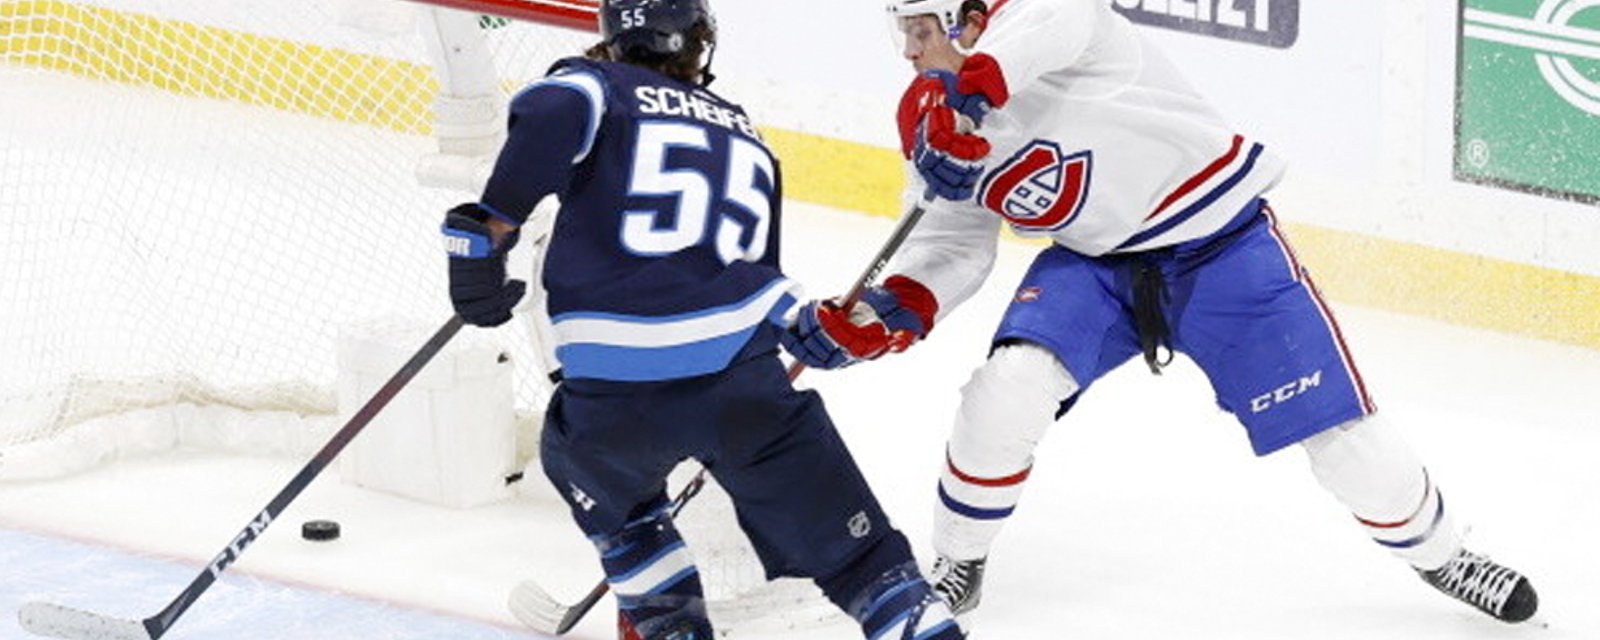 Mark Scheifele facing suspension after being called by NHL Player Safety